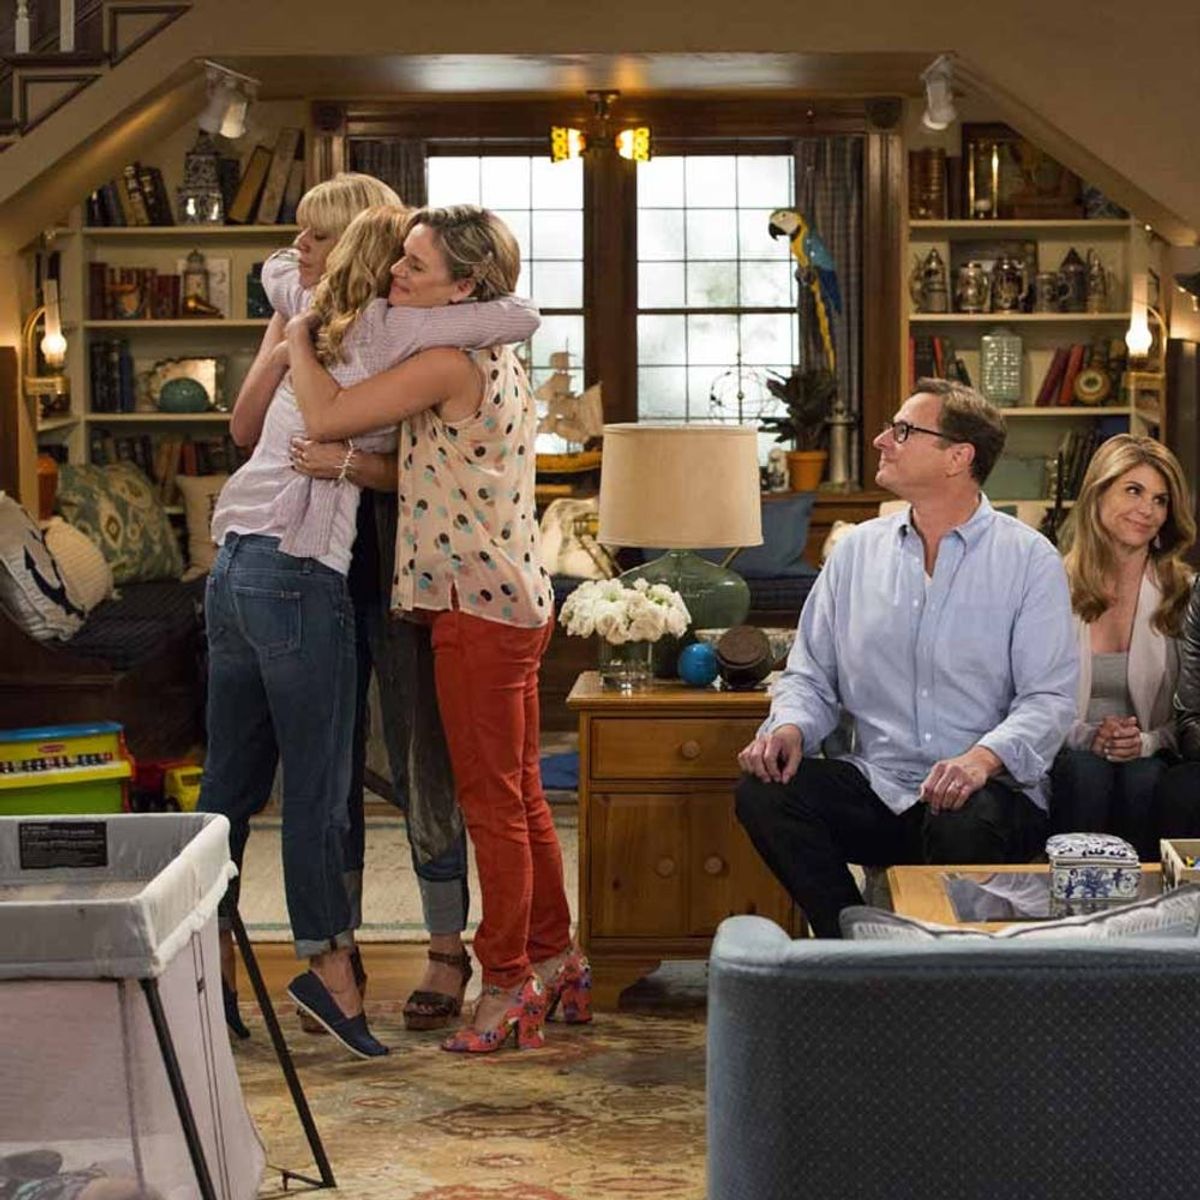 The First Trailer for Fuller House Will Hit You RIGHT in the Feels